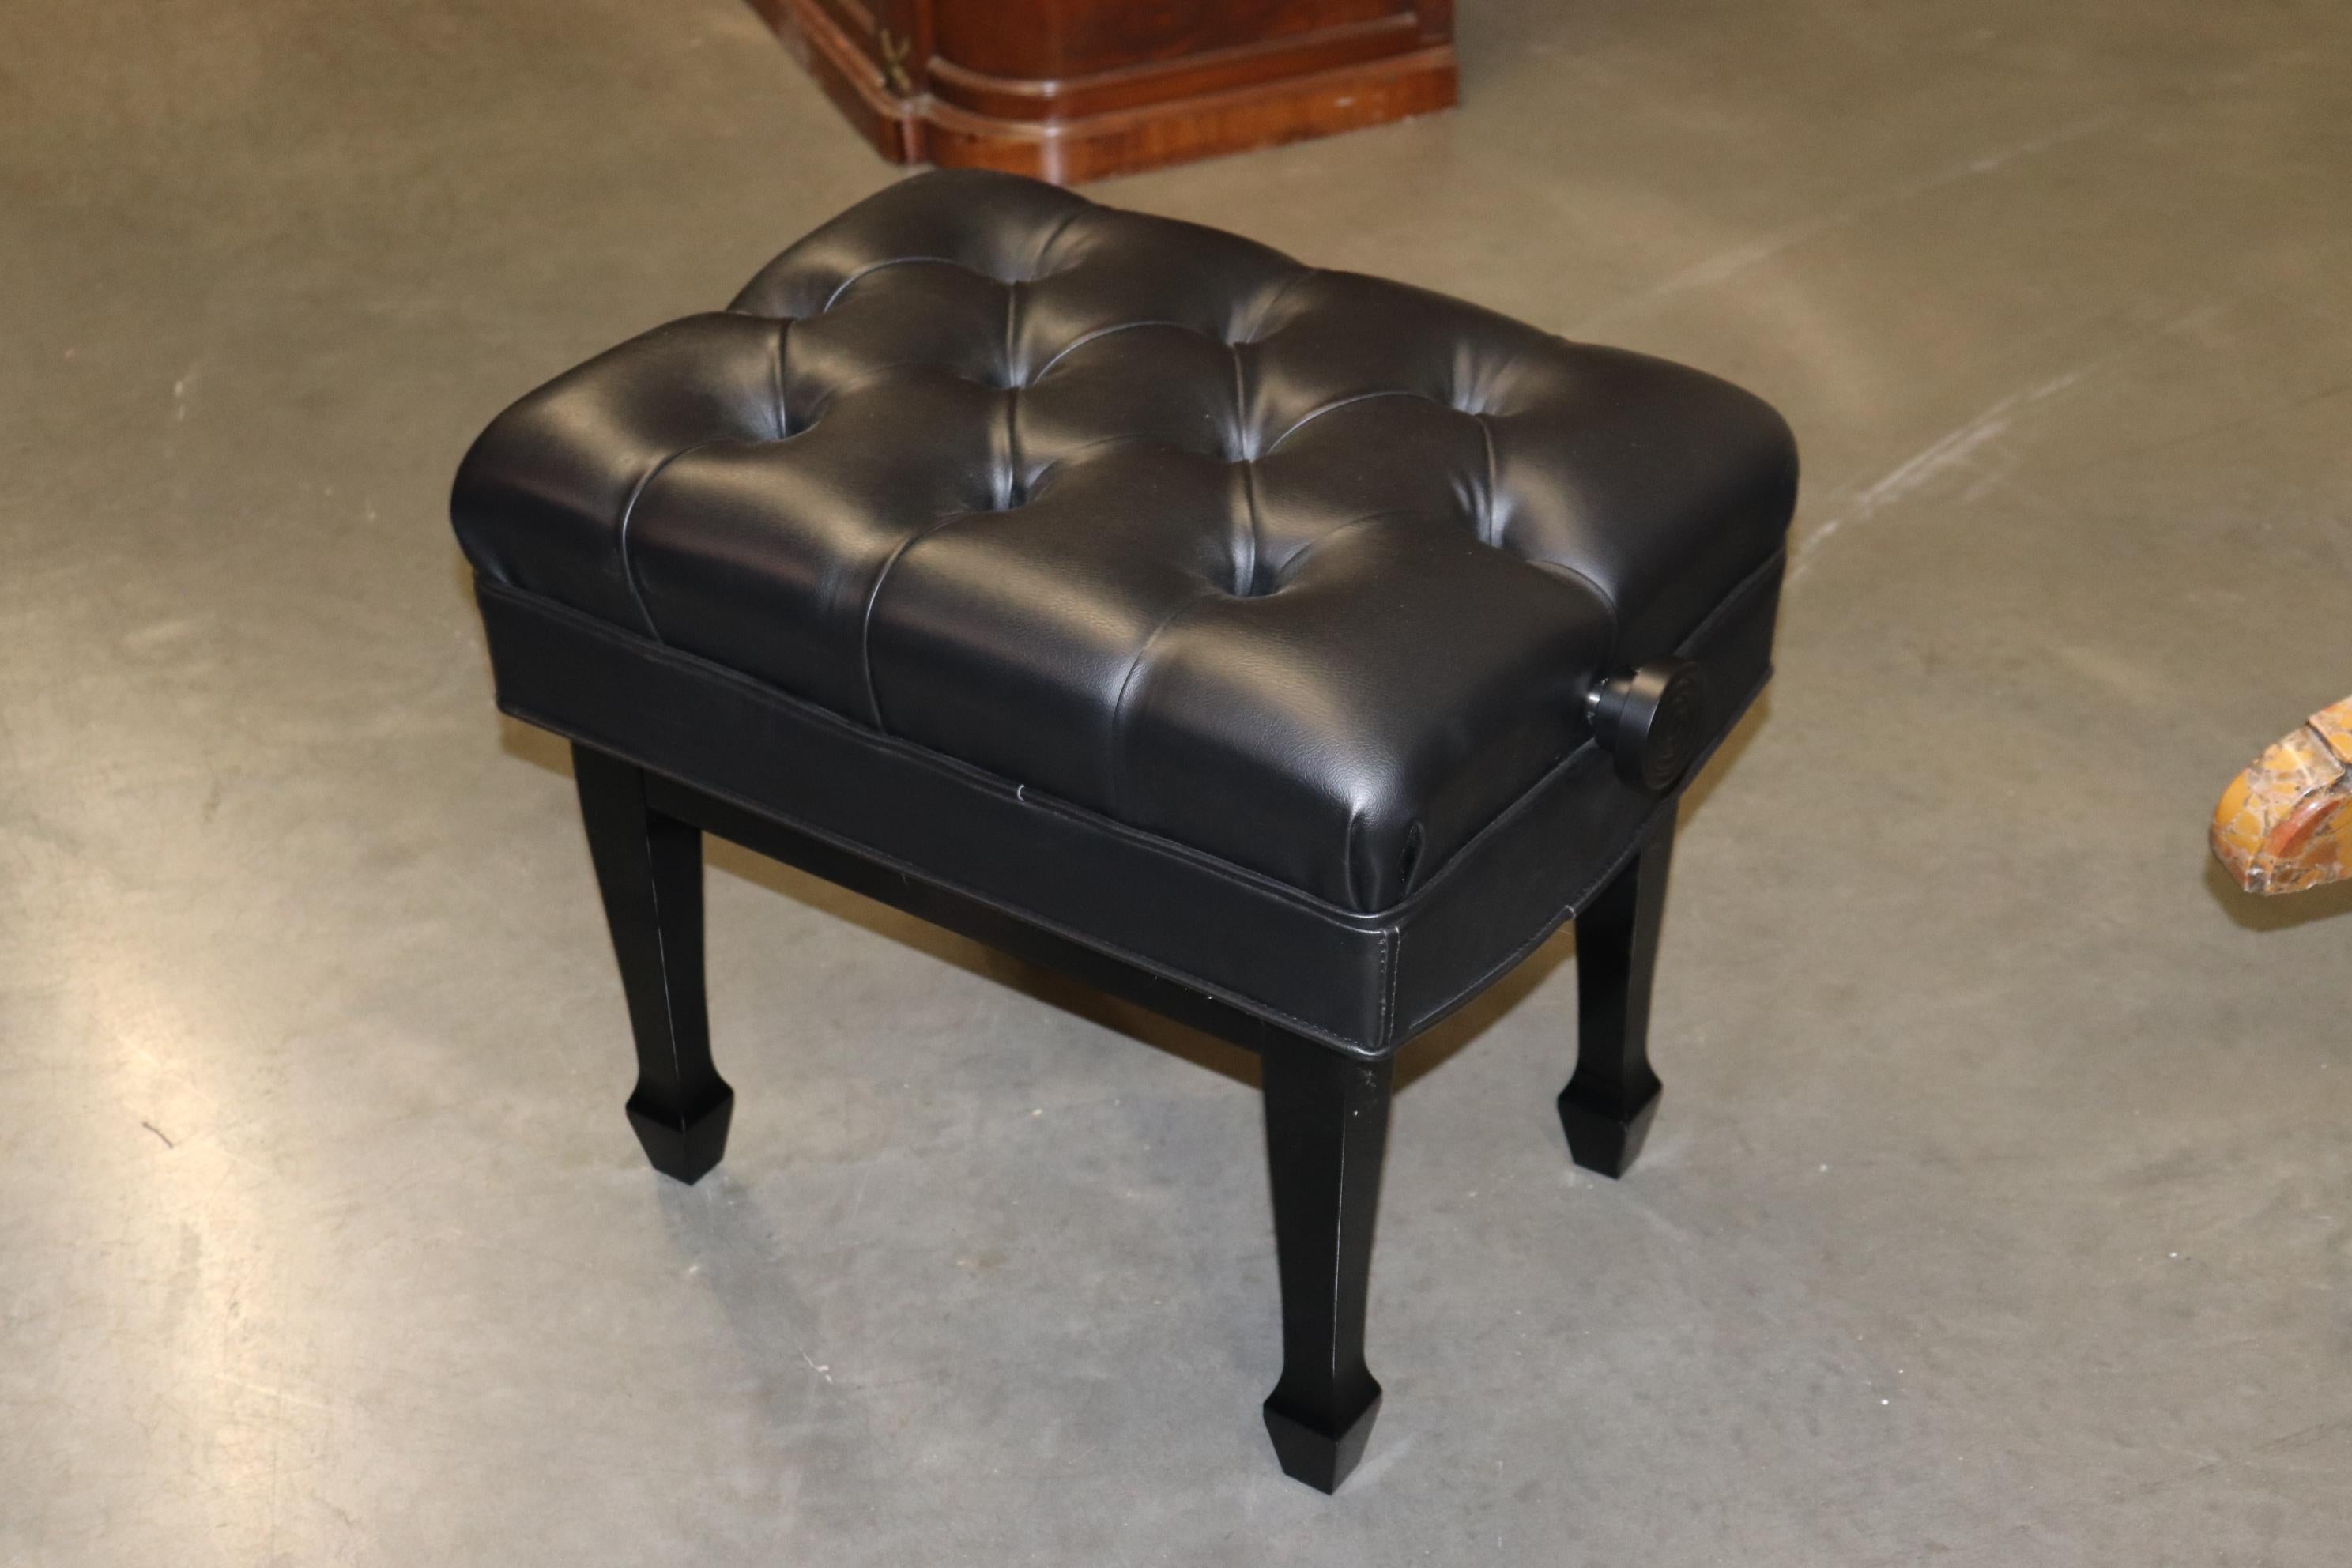 Regency Revival Paul Jansen Adjustable Gloss Black Lacquer Steinway Piano Bench Dated 2012